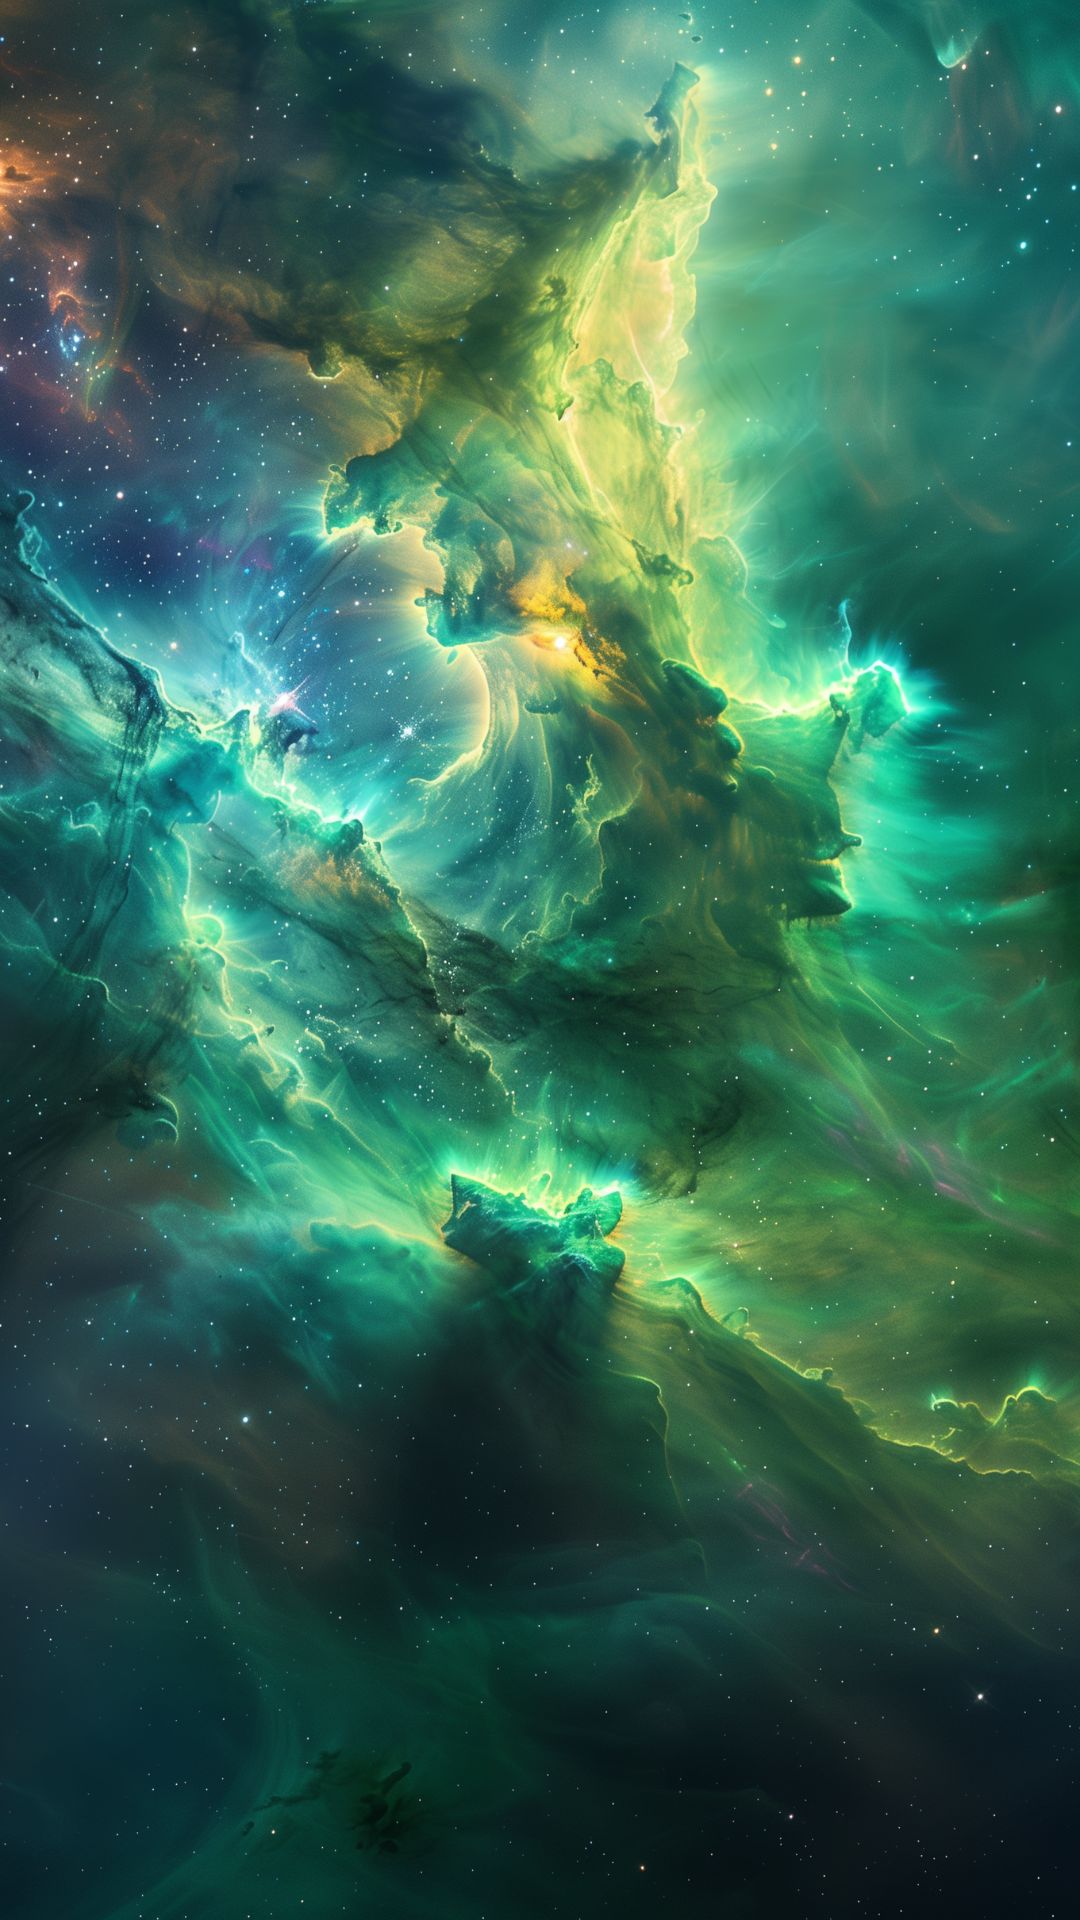 23 Cosmic Galaxy Nebula iPhone Wallpapers and free Midjourney Prompts 